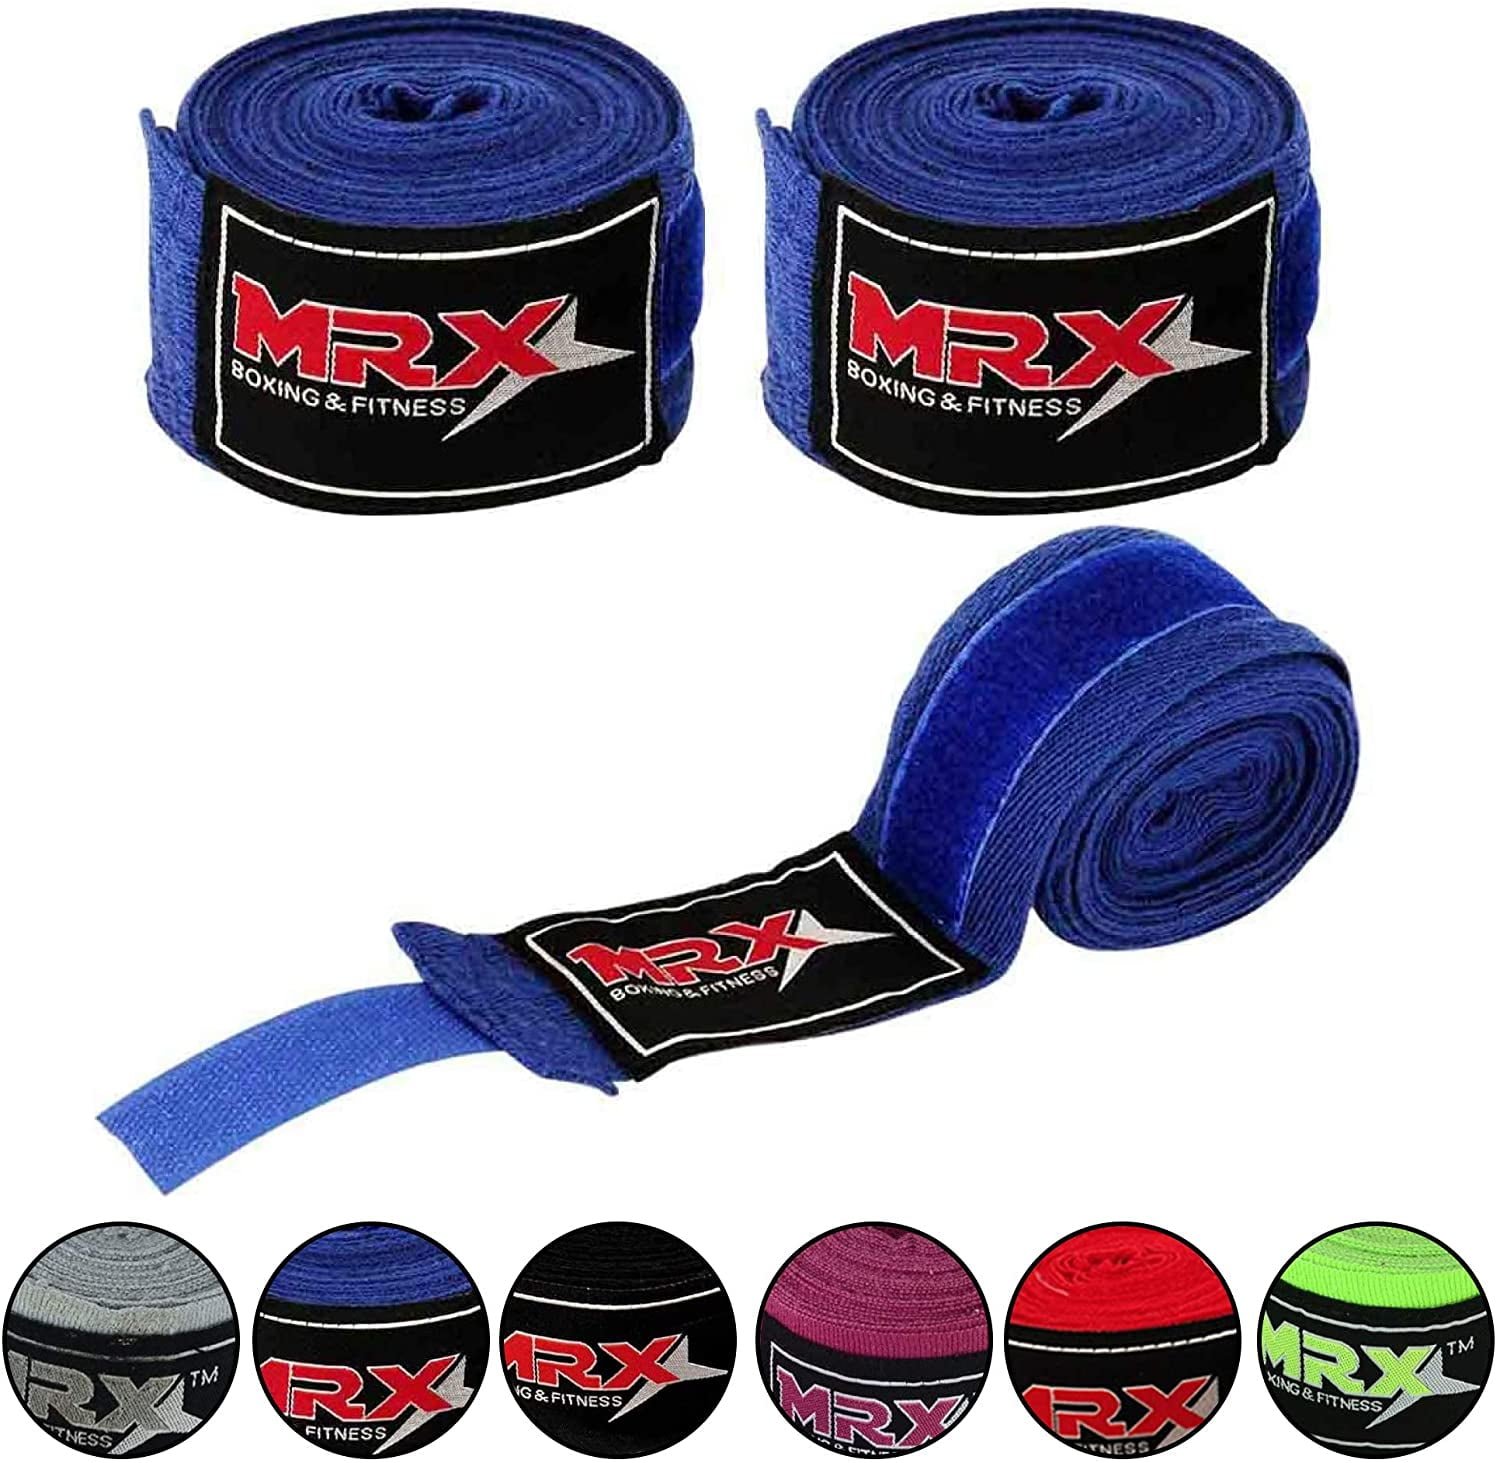 Details about   Boxing Hand Wraps Wrist Support Brace Sport Exercise Training Hand Protector for 